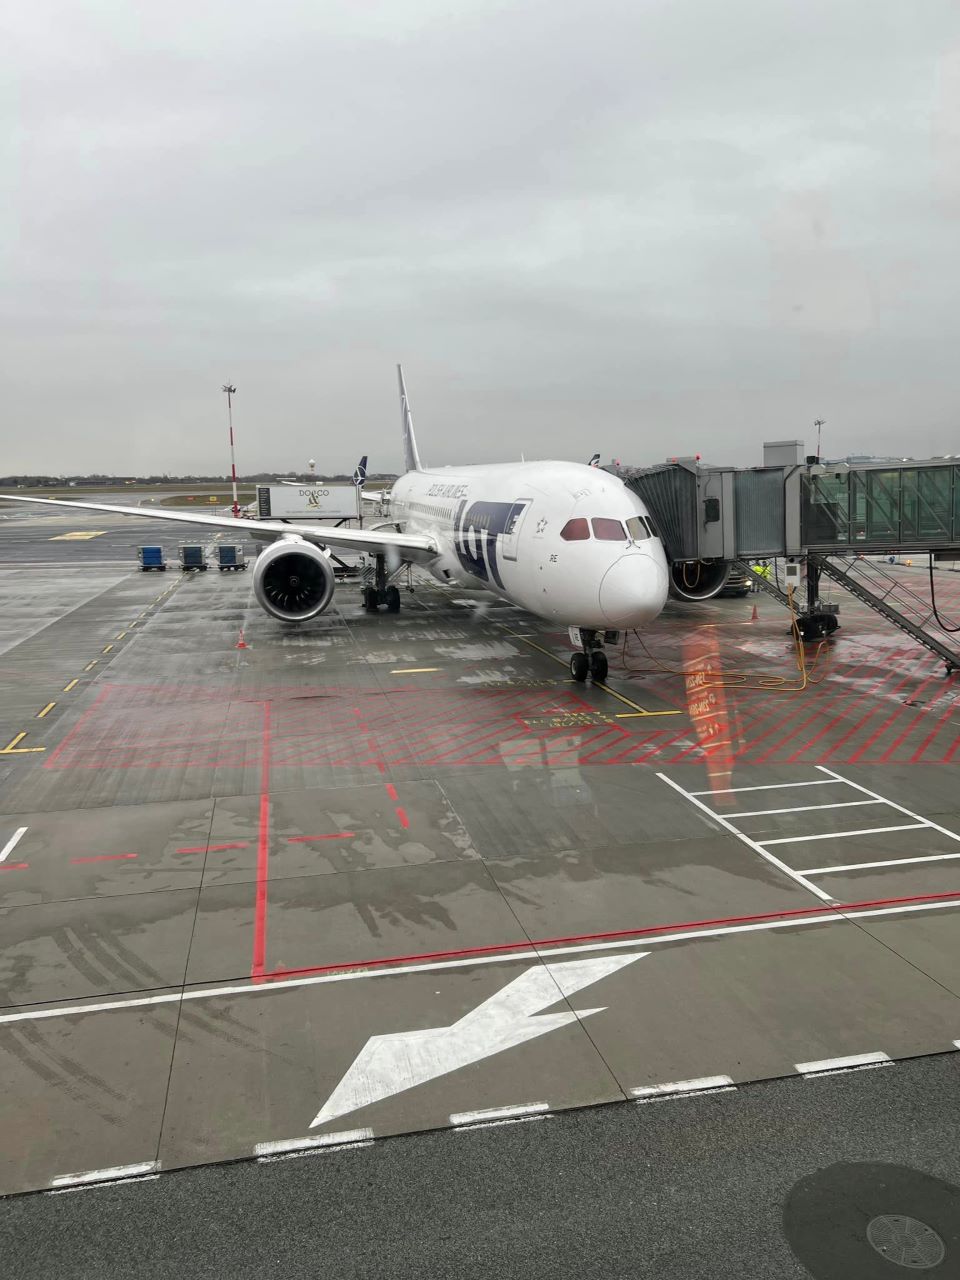 LOT Polish Airlines Business Class airplane 